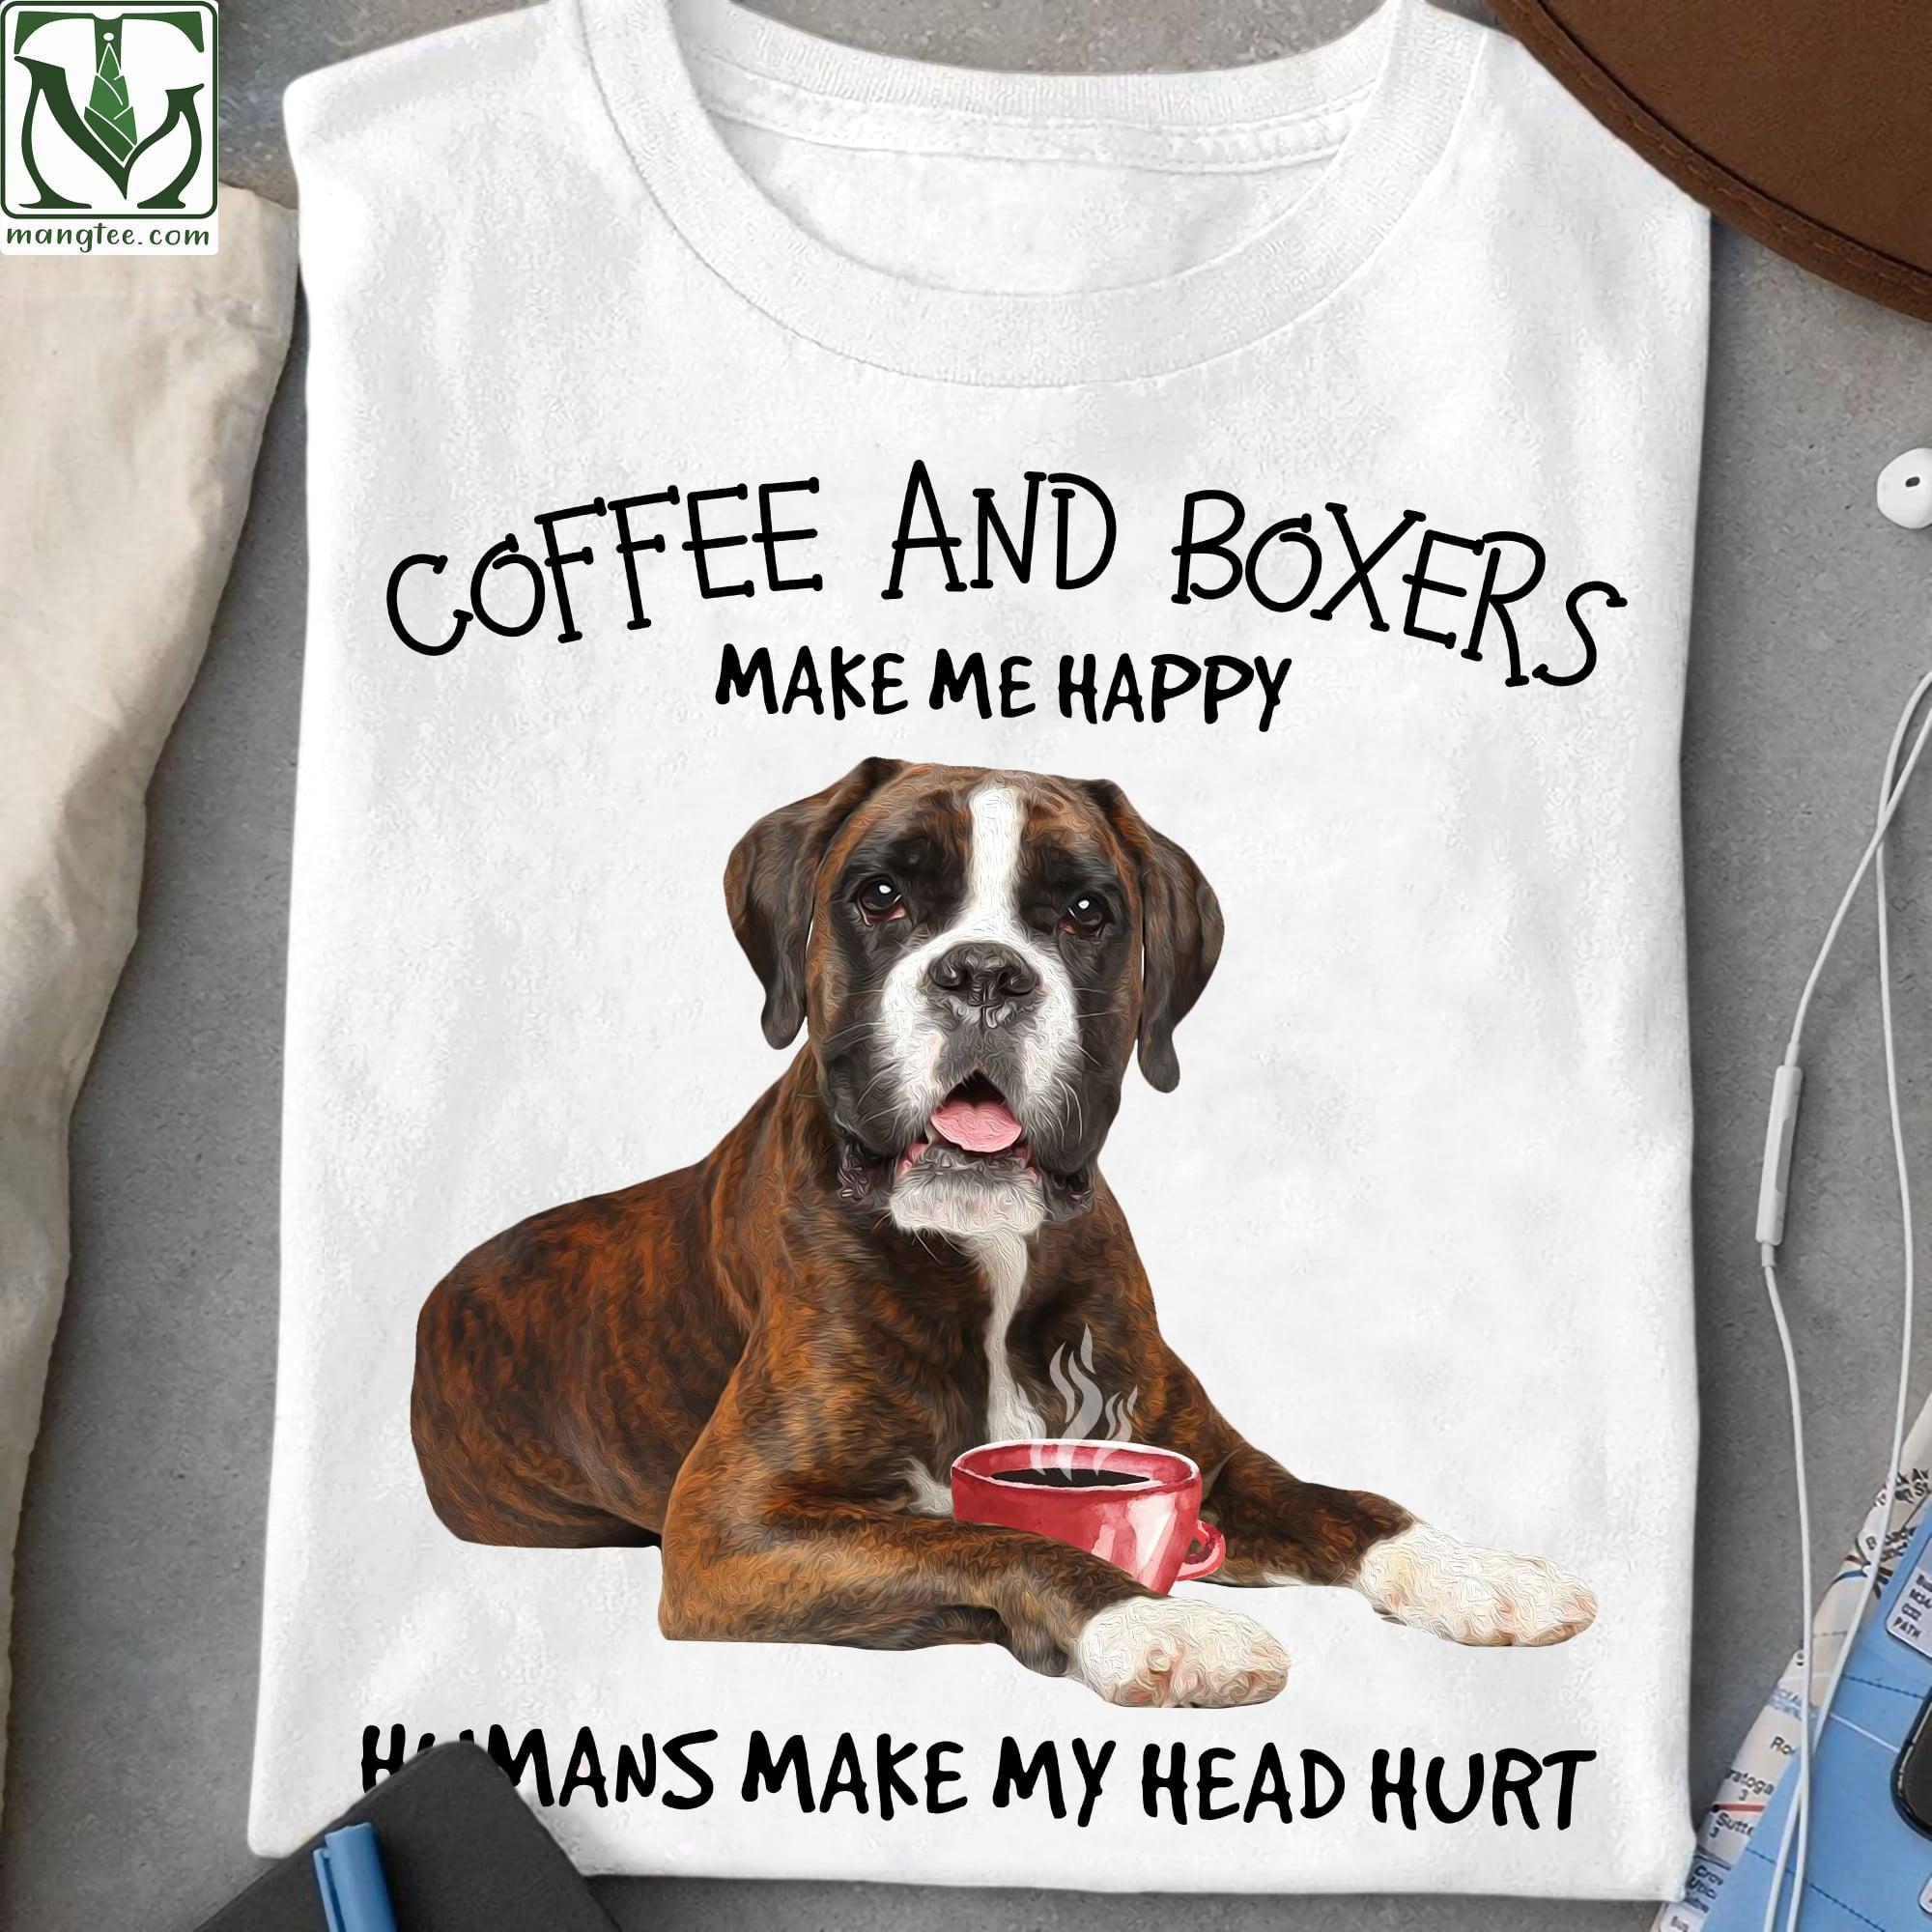 Coffee and Boxers make me happy, humans make my head hurt - Dog and coffee, Boxer breed dog